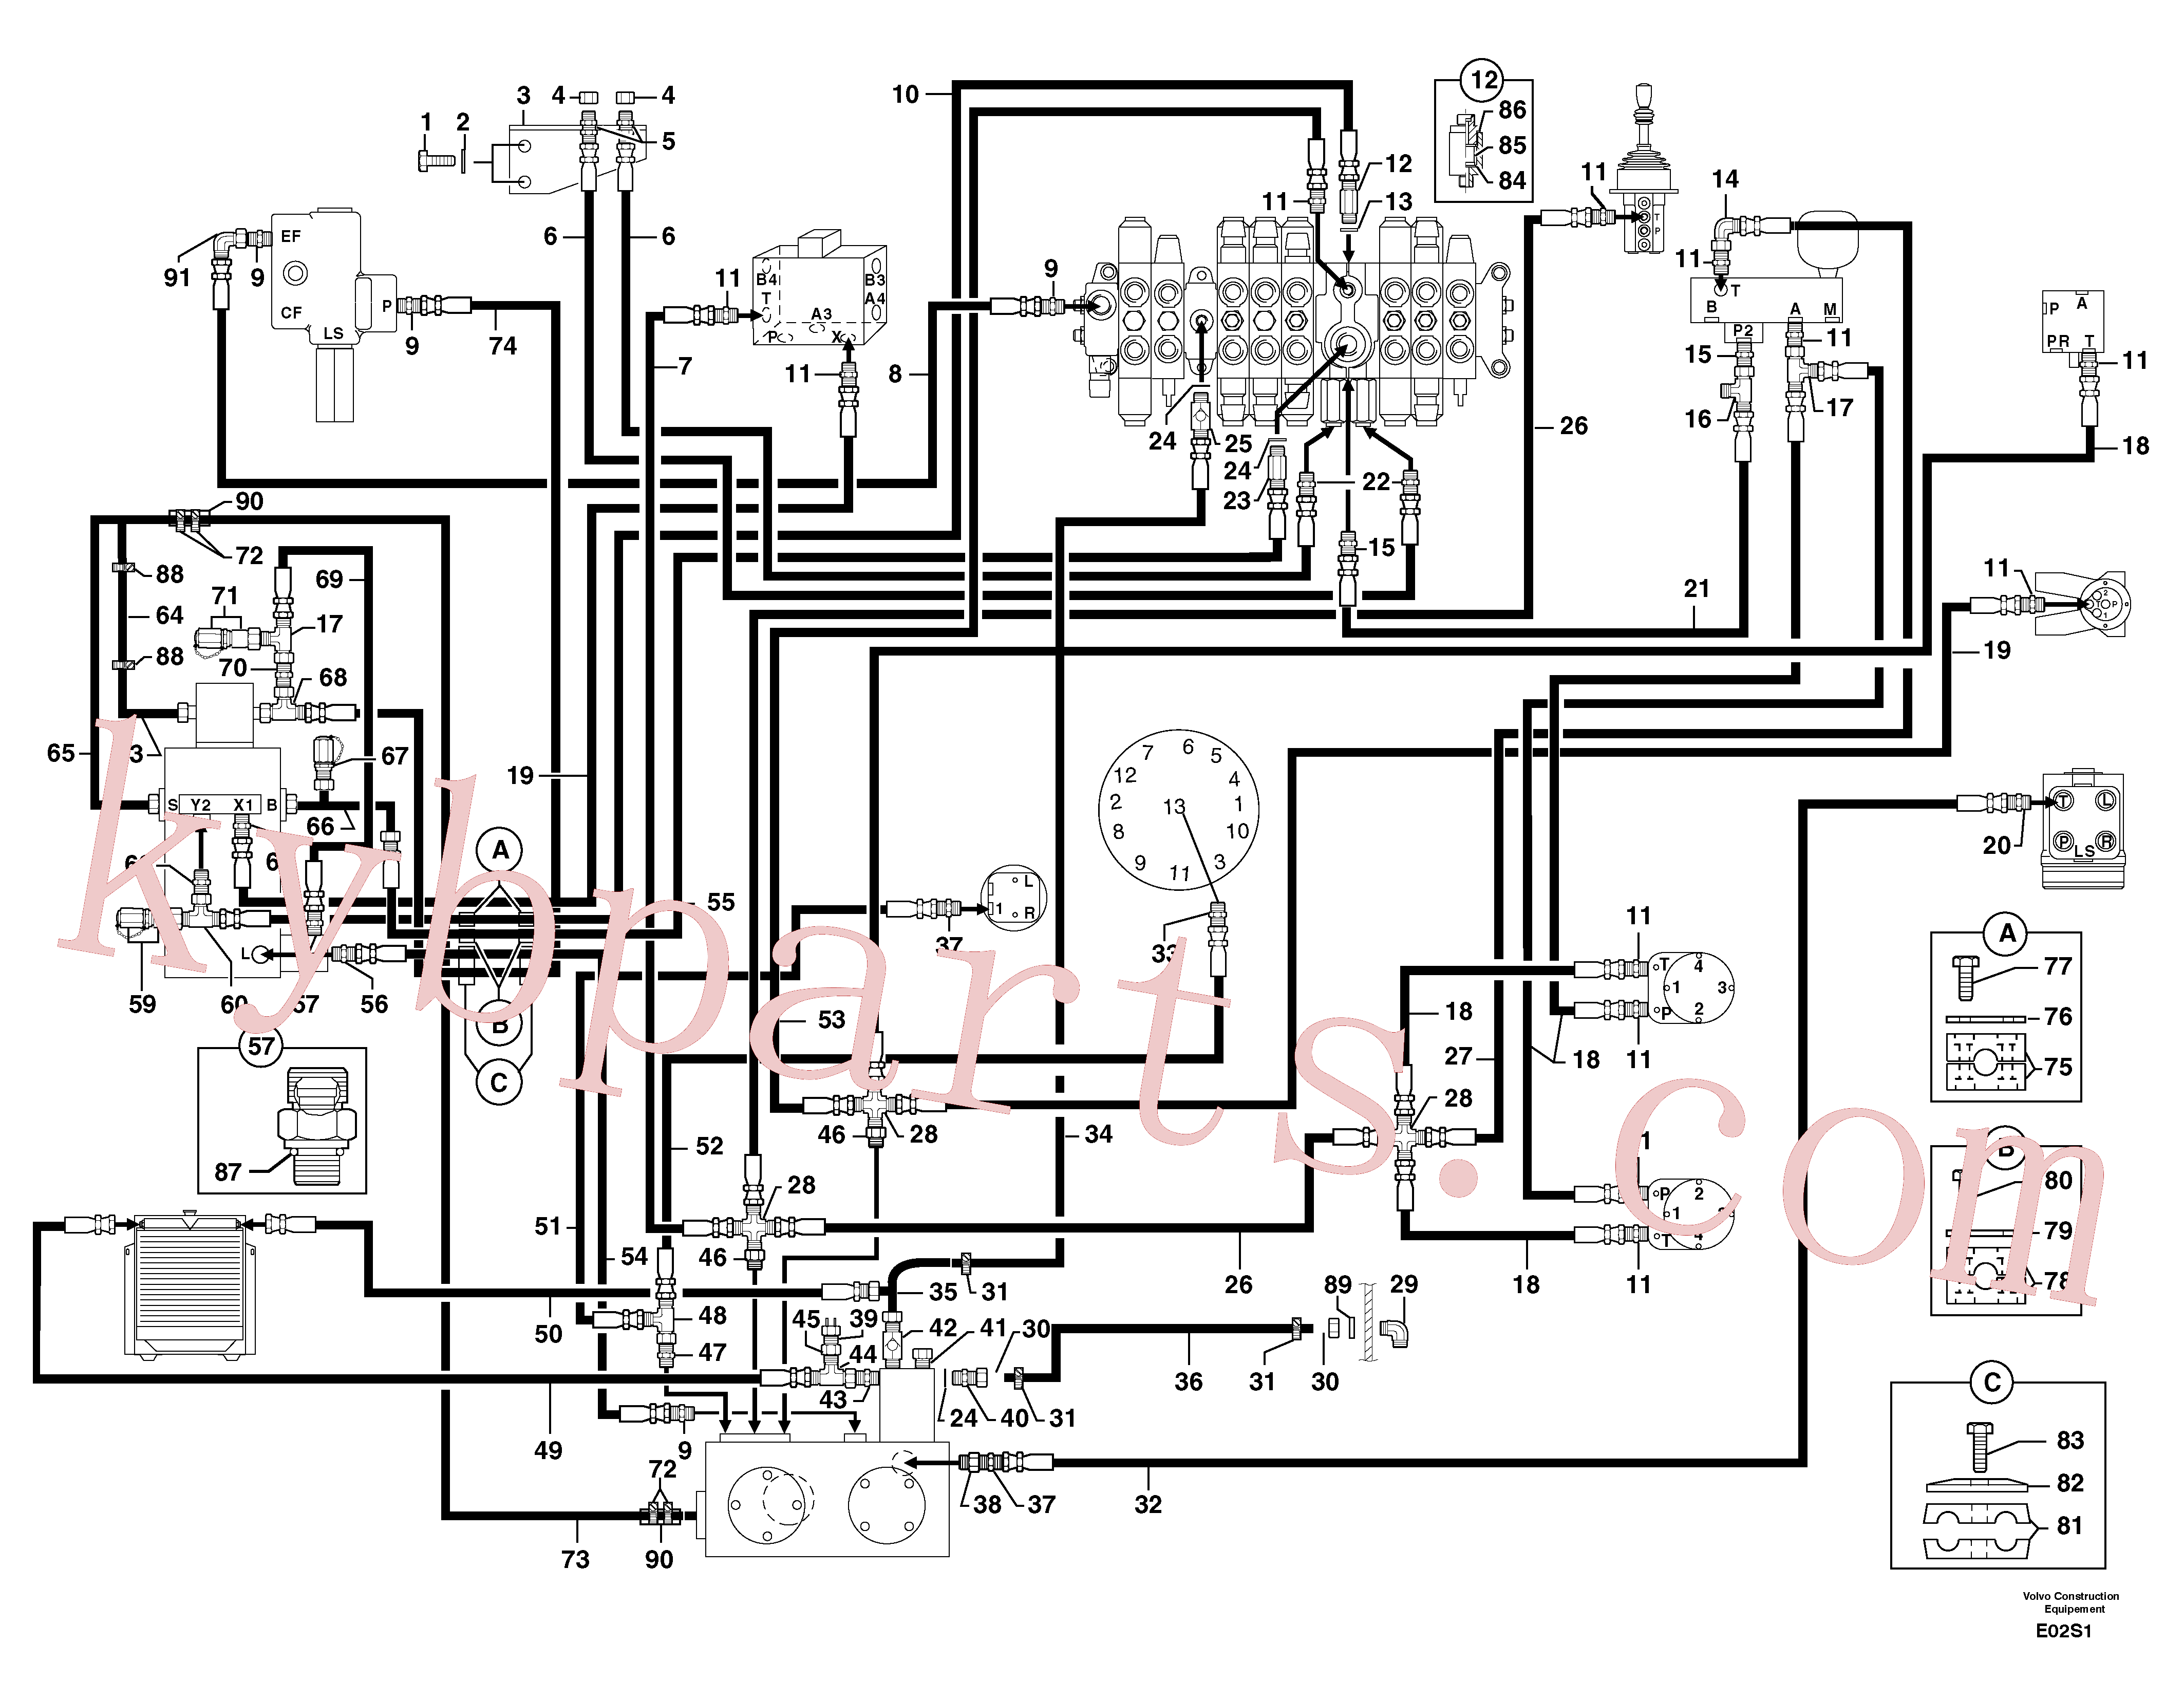 PJ4770679 for Volvo Attachments supply and return circuit(E02S1 assembly)